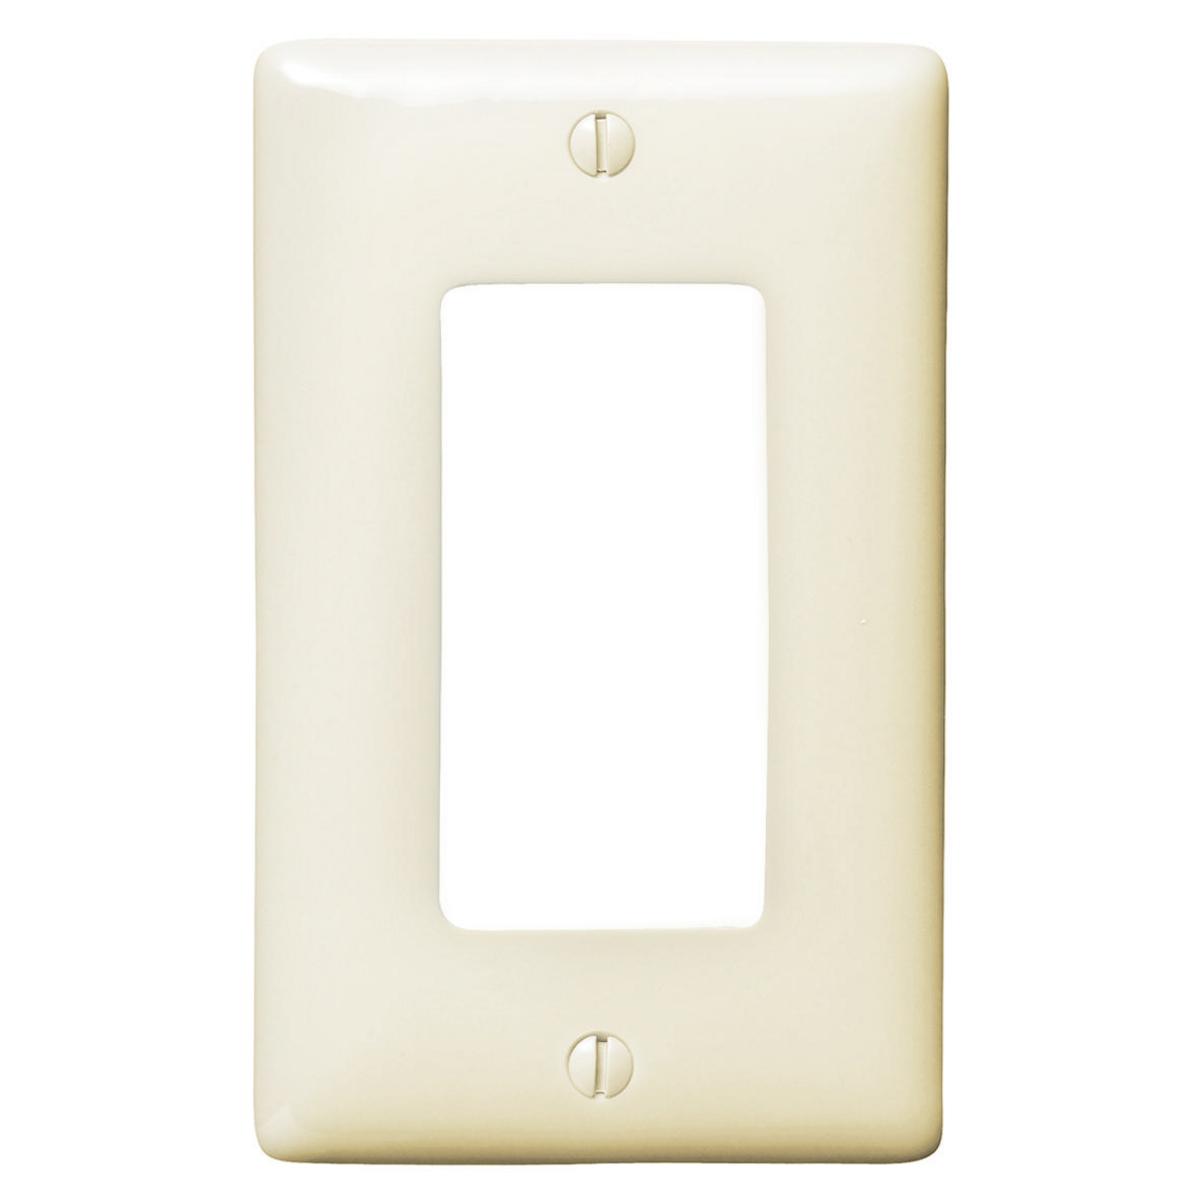 Hubbell NPJ26LA Wallplates and Box Covers, Wallplate, Nylon, Mid-Sized, 1-Gang, 1) Decorator, Light Almond  ; Standard Size is 1/8" larger to give you extra coverage to hide rough box openingsCurved corners for improved aesthetics, for use in any applicationAlso availabl